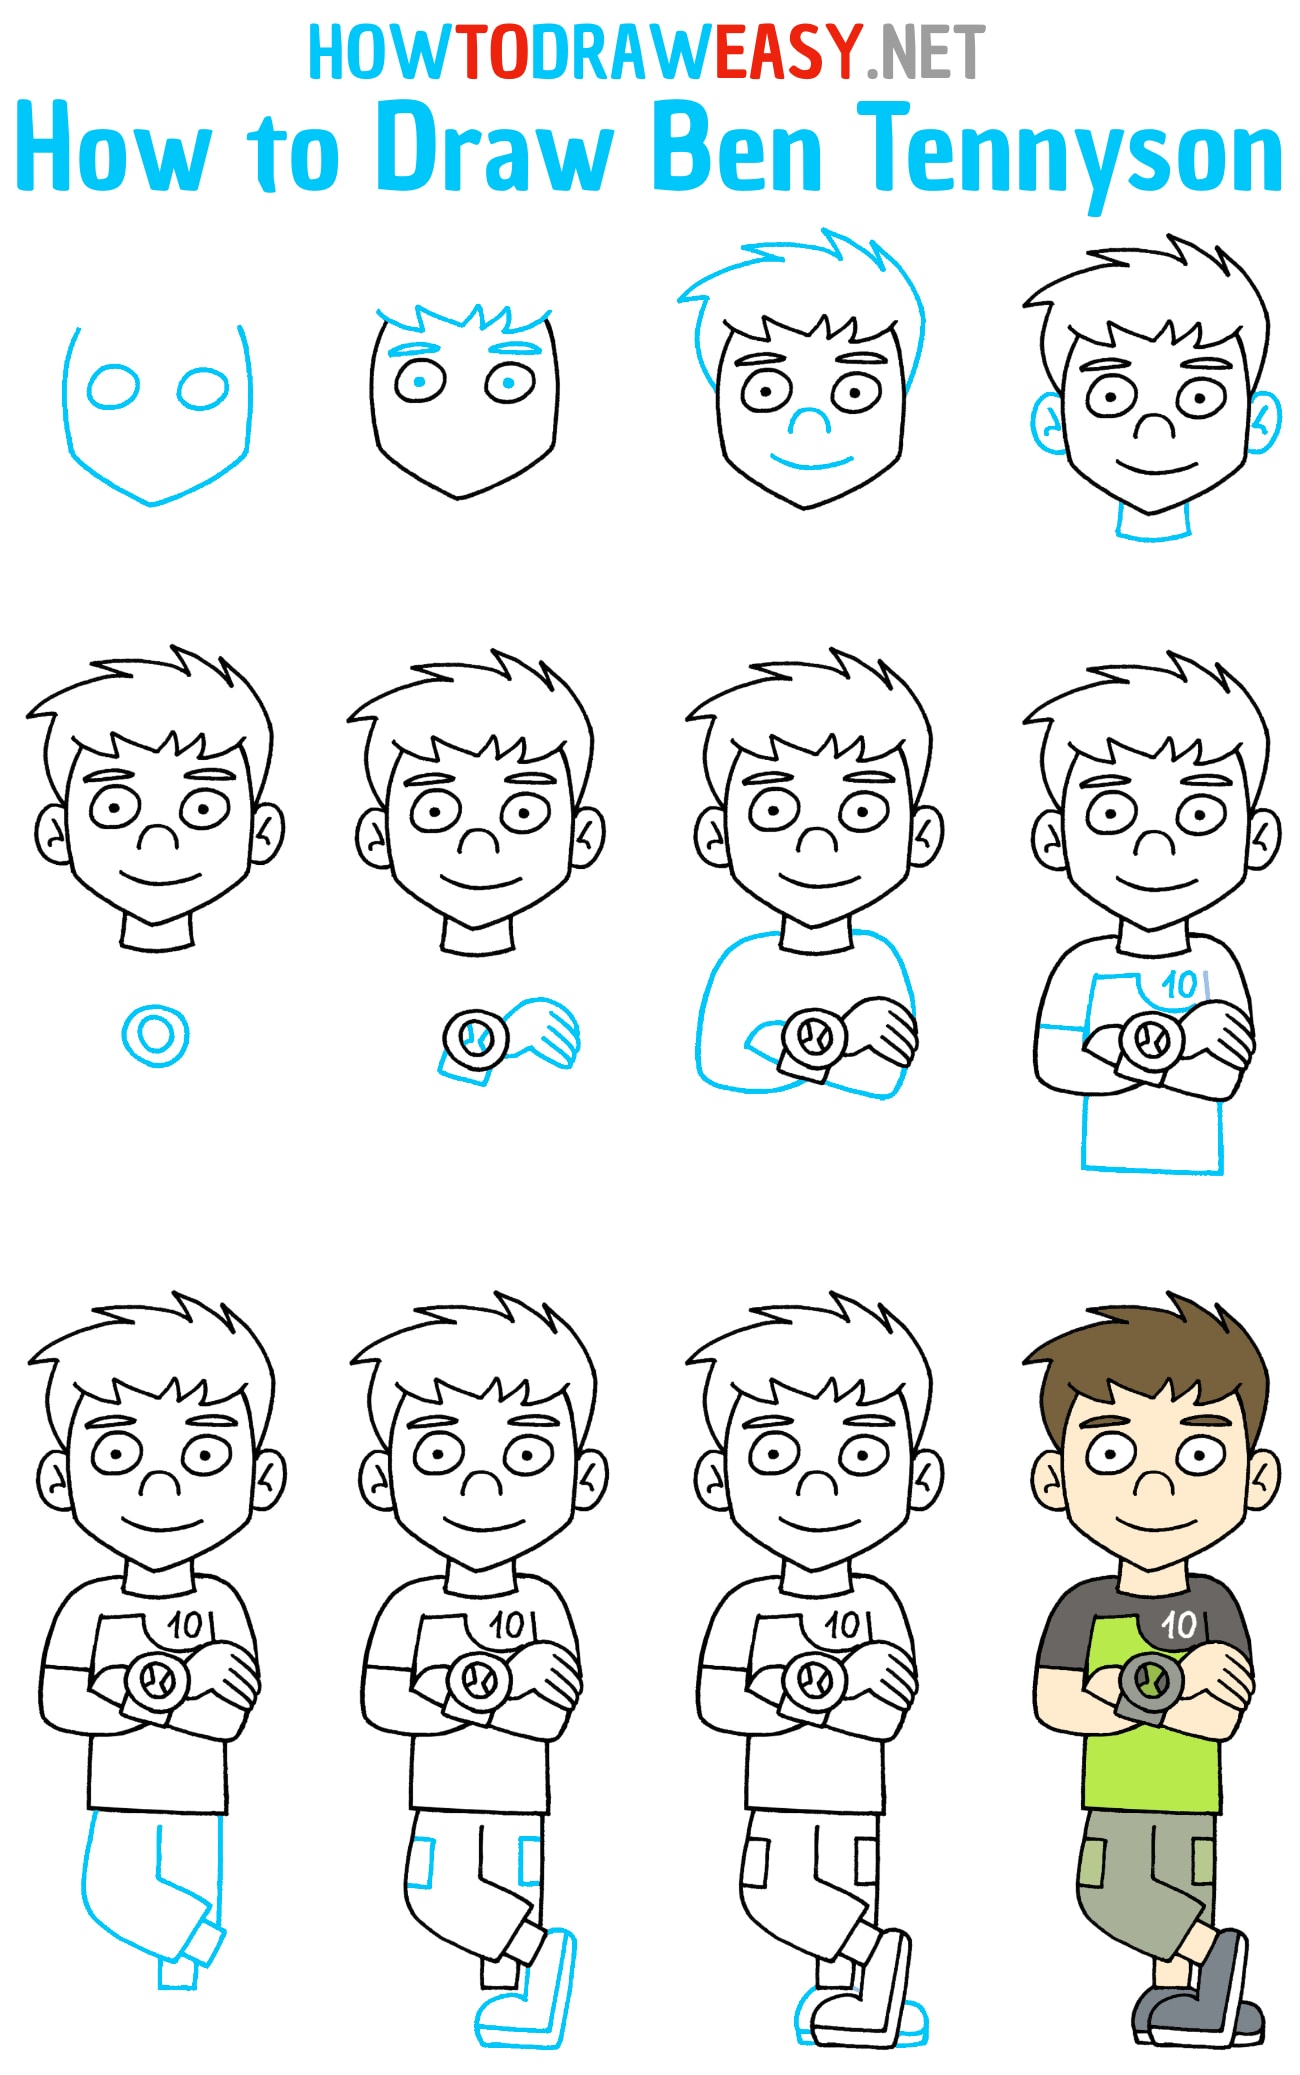 How to Draw Ben Tennyson Step by Step